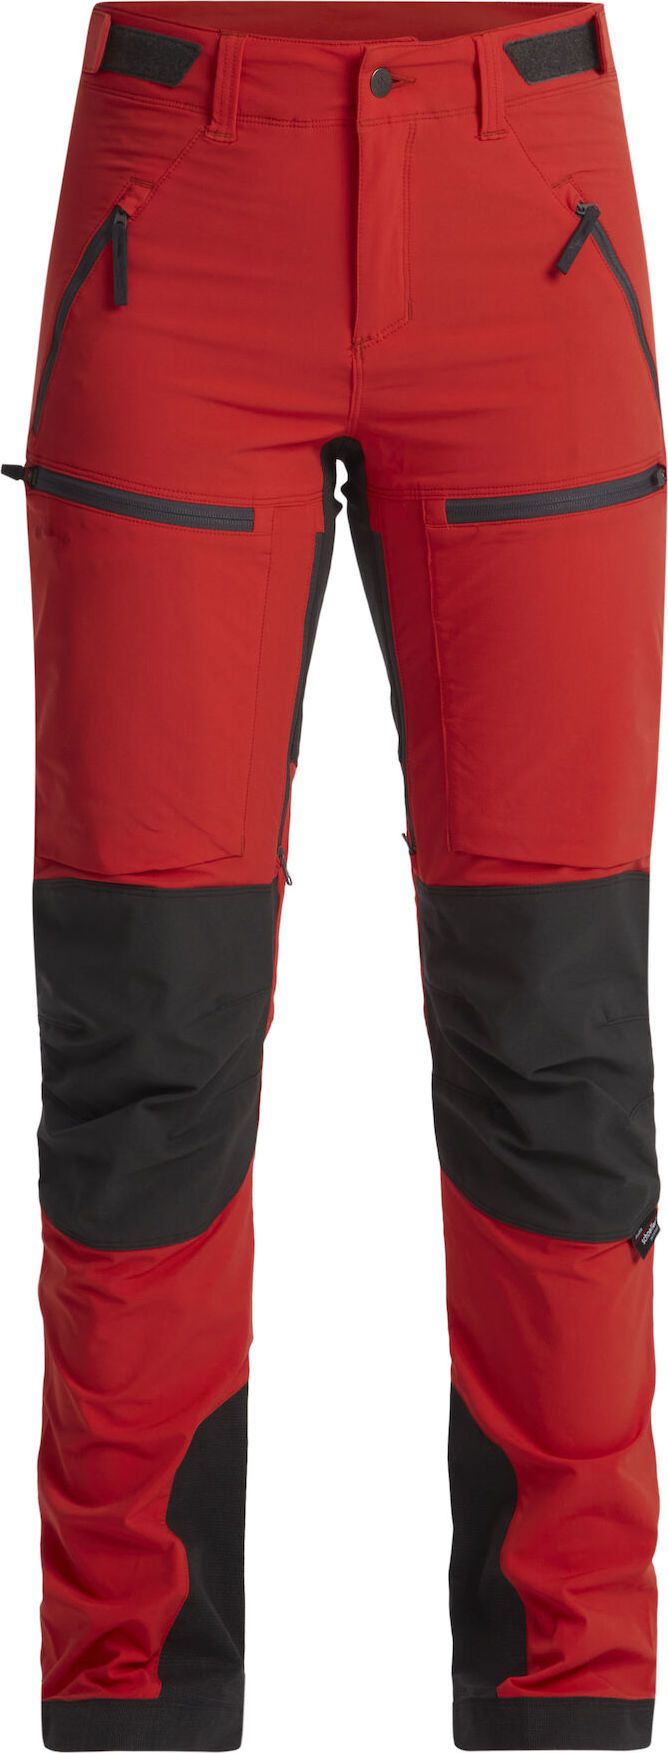 Lundhags Women's Askro Pro Pant Lively Red/Charcoal